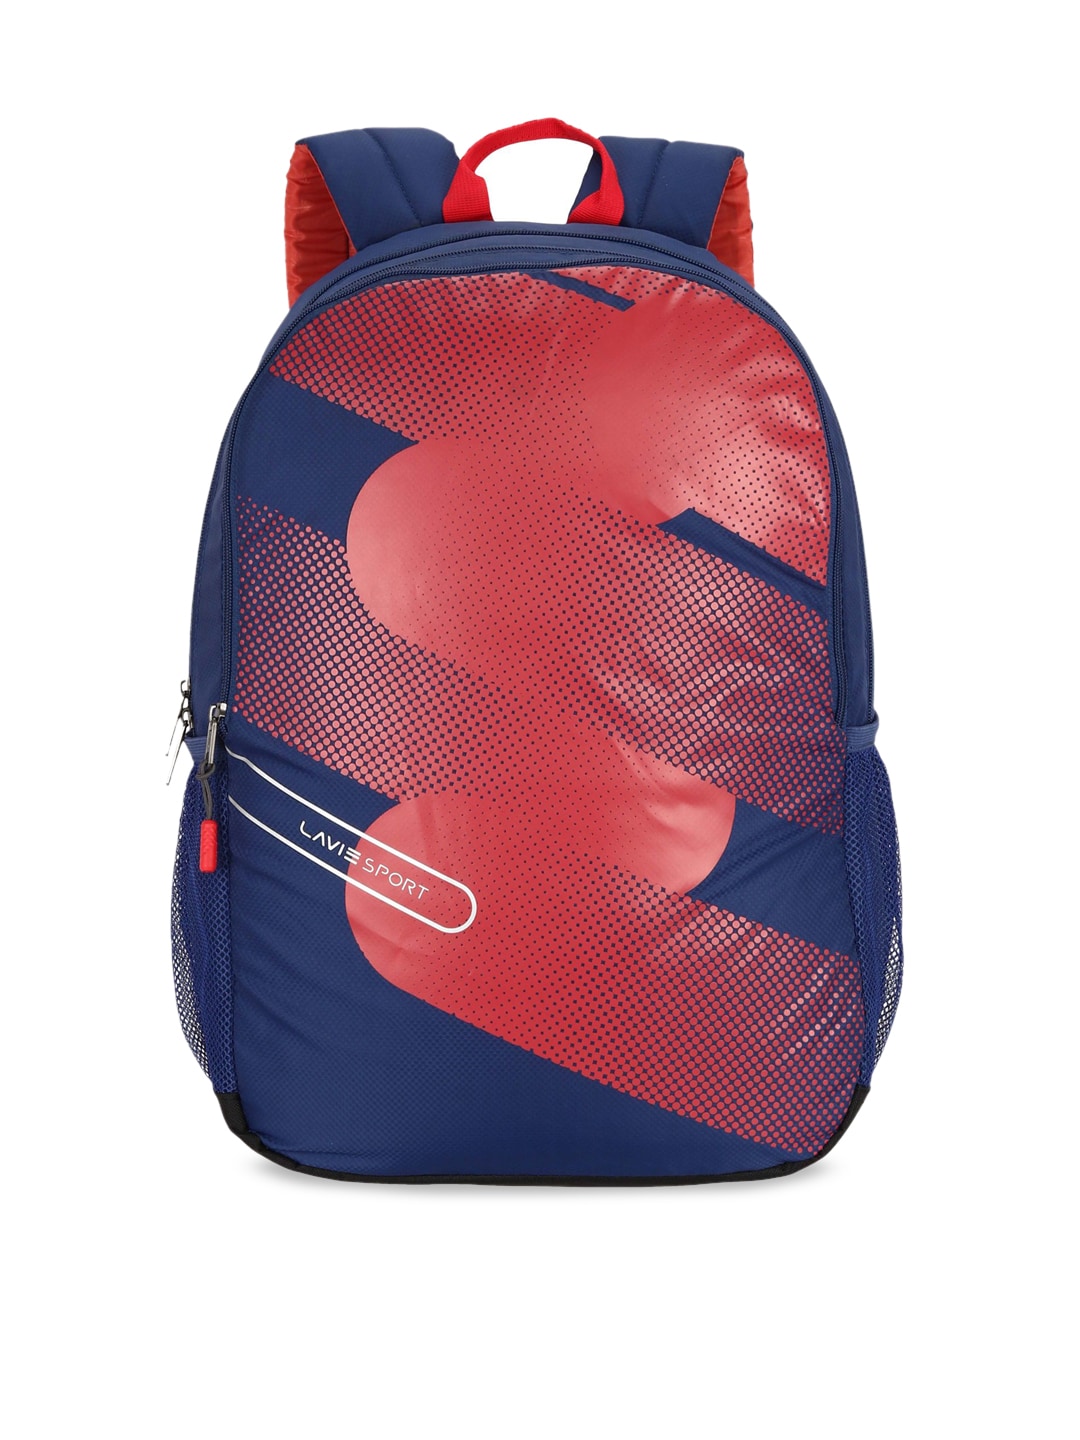 LAVIE SPORT Unisex Blue & Red Backpack Price in India